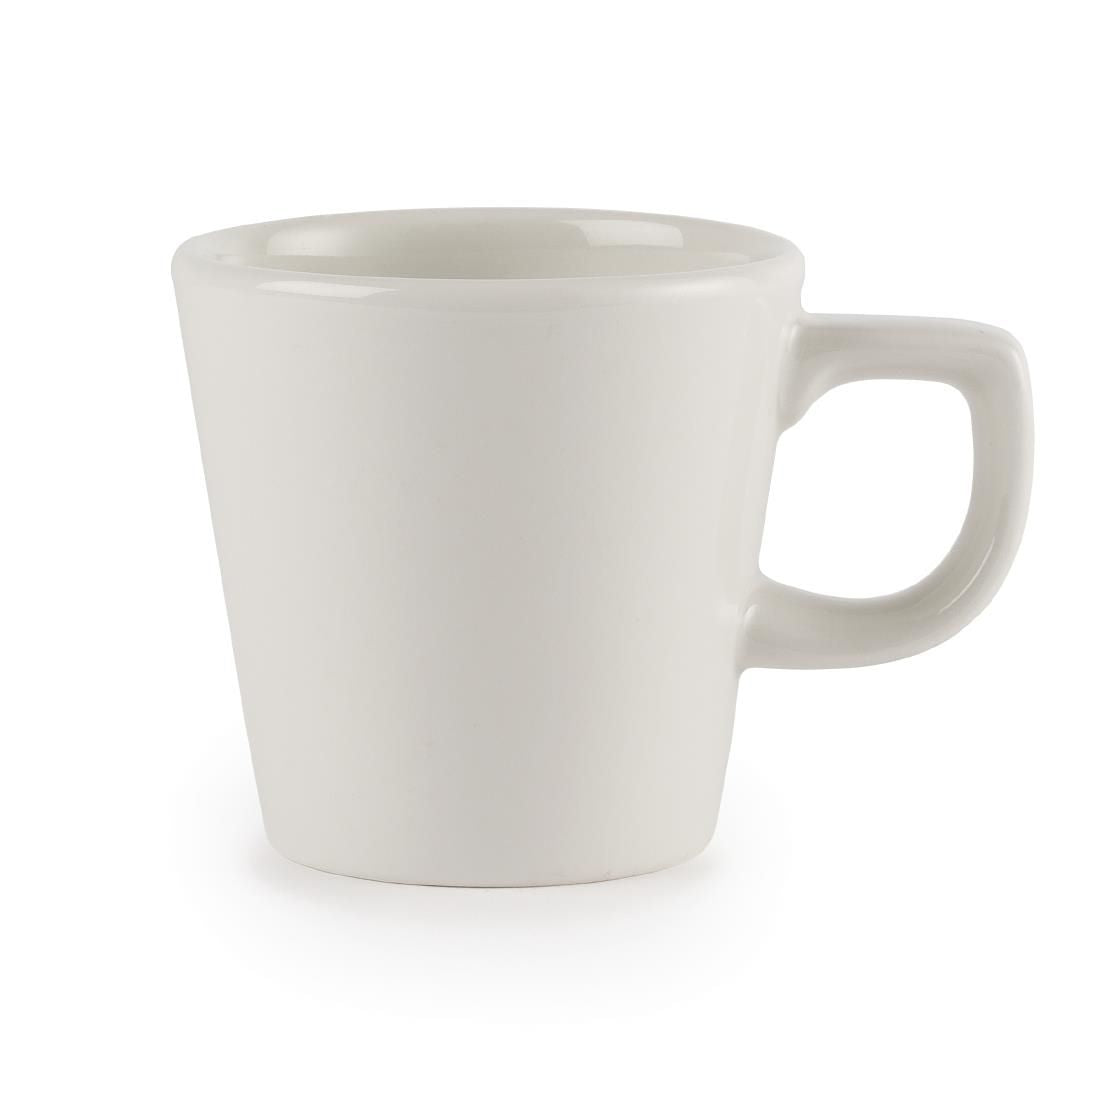 Churchill Plain Whiteware Cafe Cups 115ml (Pack of 24) JD Catering Equipment Solutions Ltd